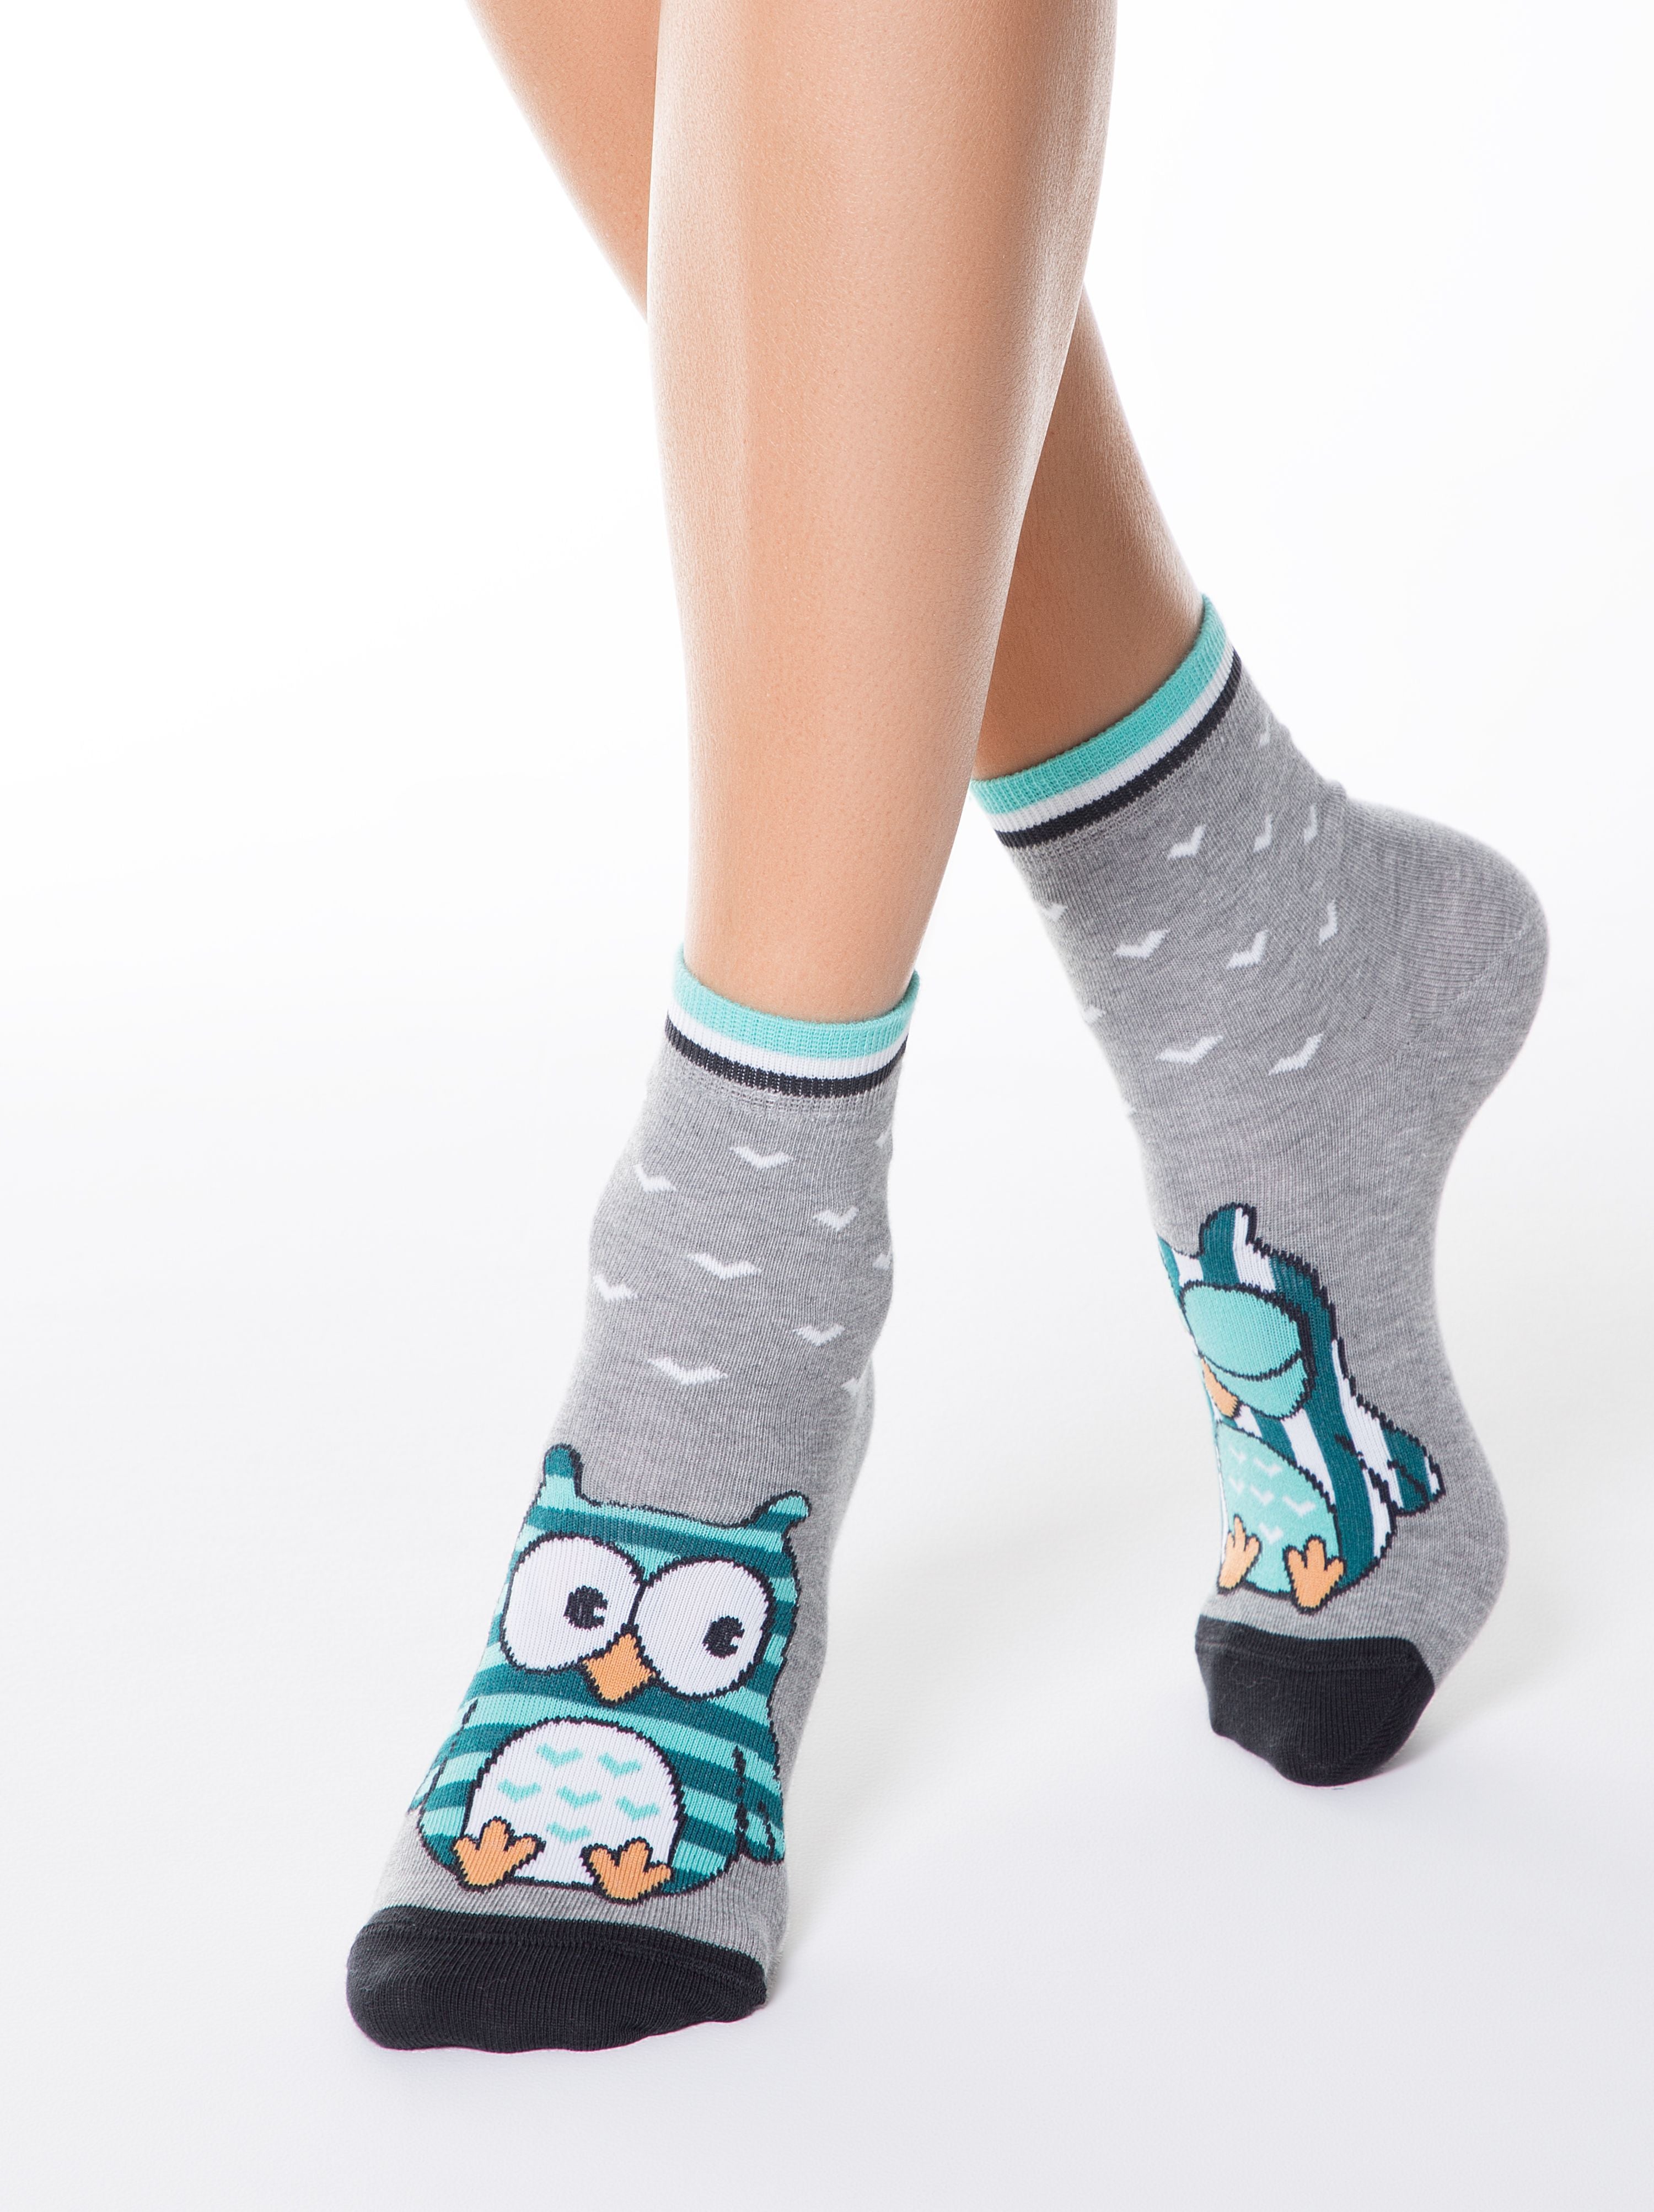 Owl sock is cool funny crazy Socks by Conte Elegant